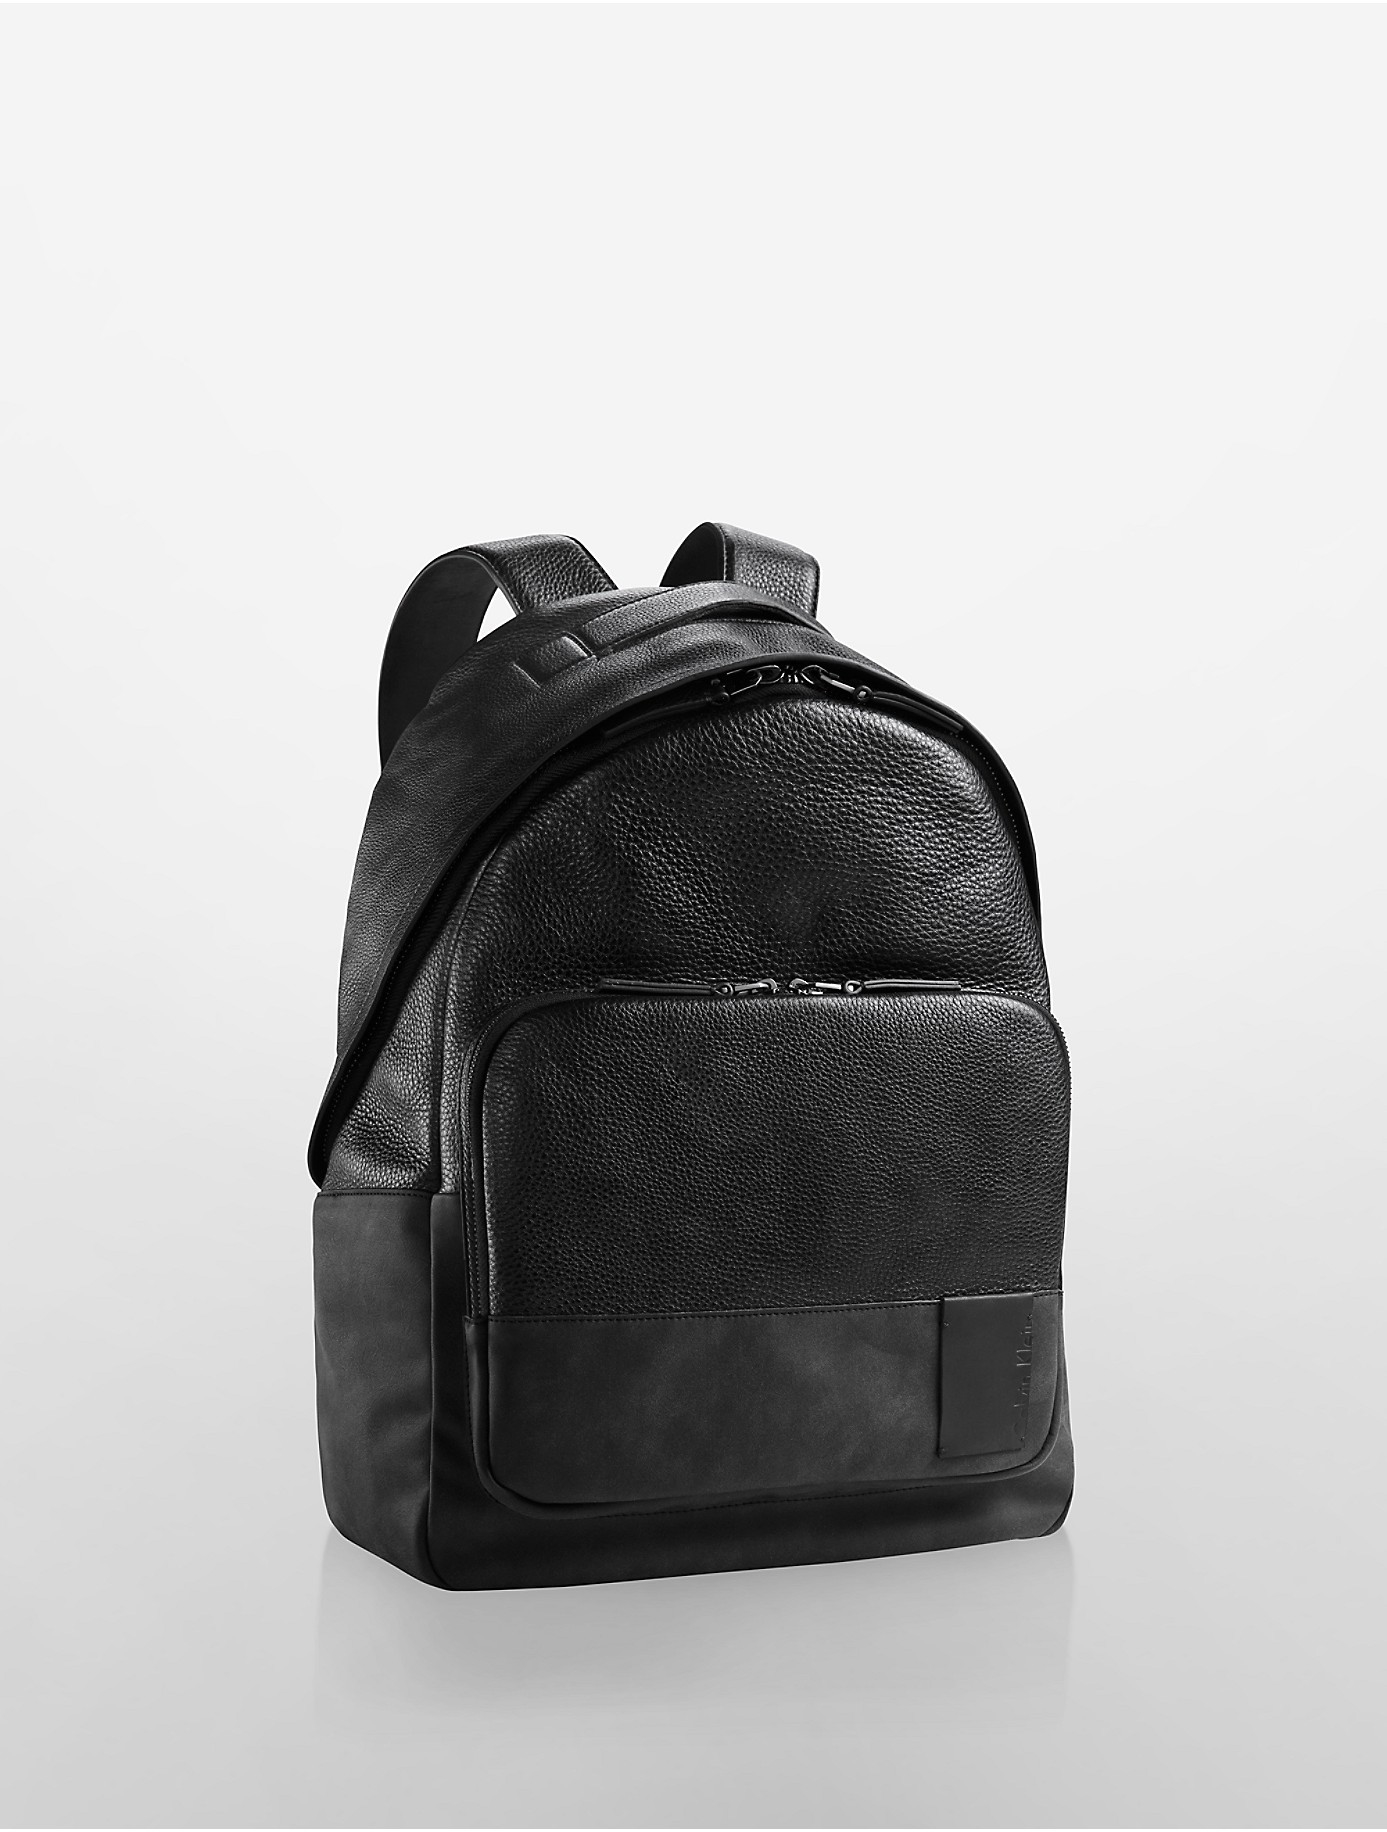 Calvin Klein Jeans Pebble Textured Leather Backpack in Black | Lyst